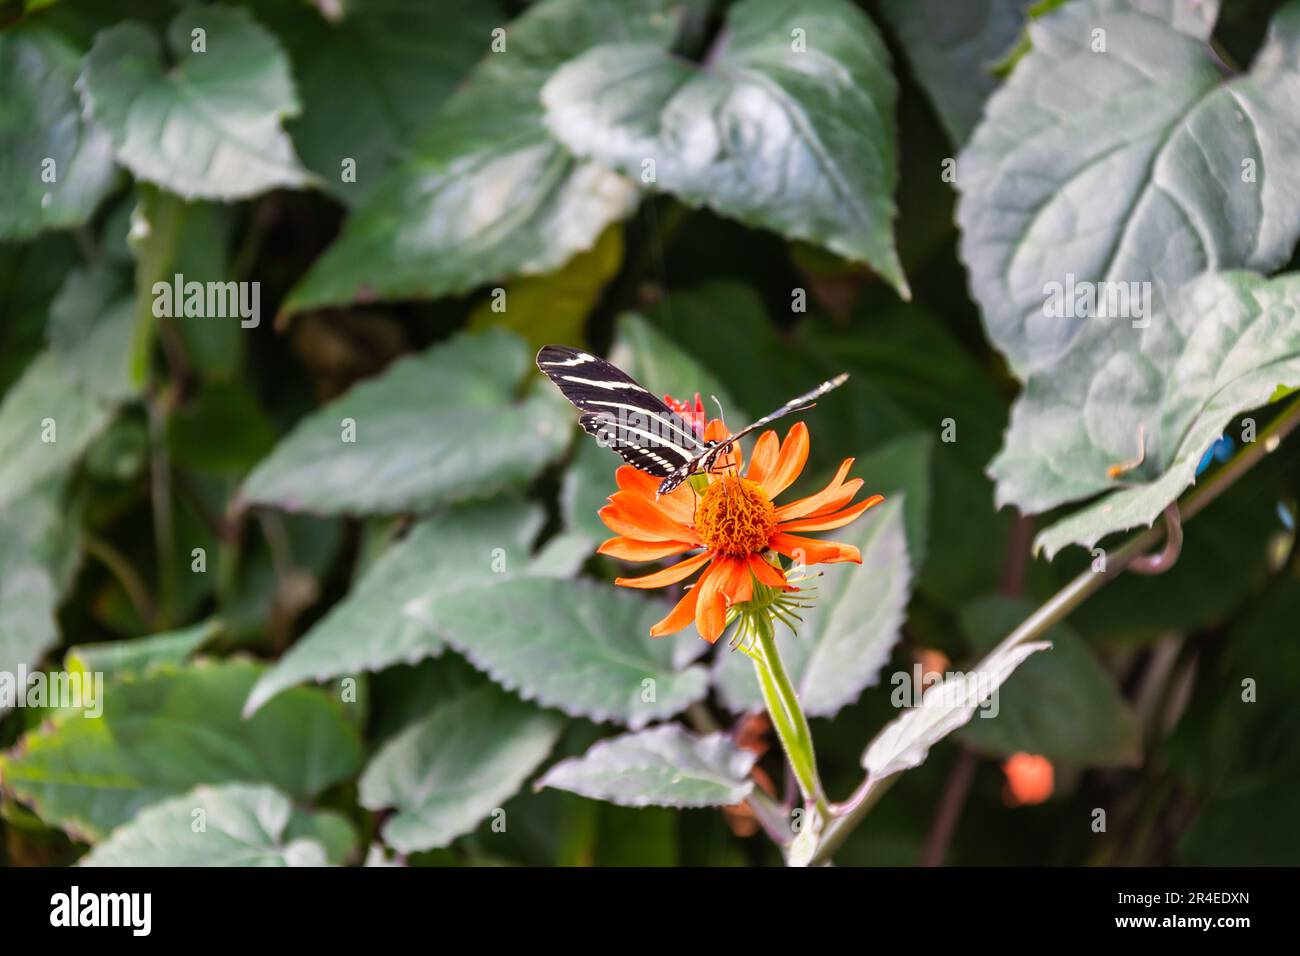 A Zebra Longwing butterfly on a blooming Mexican Flame Vine with a slightly blurred background of green leaves. Stock Photo